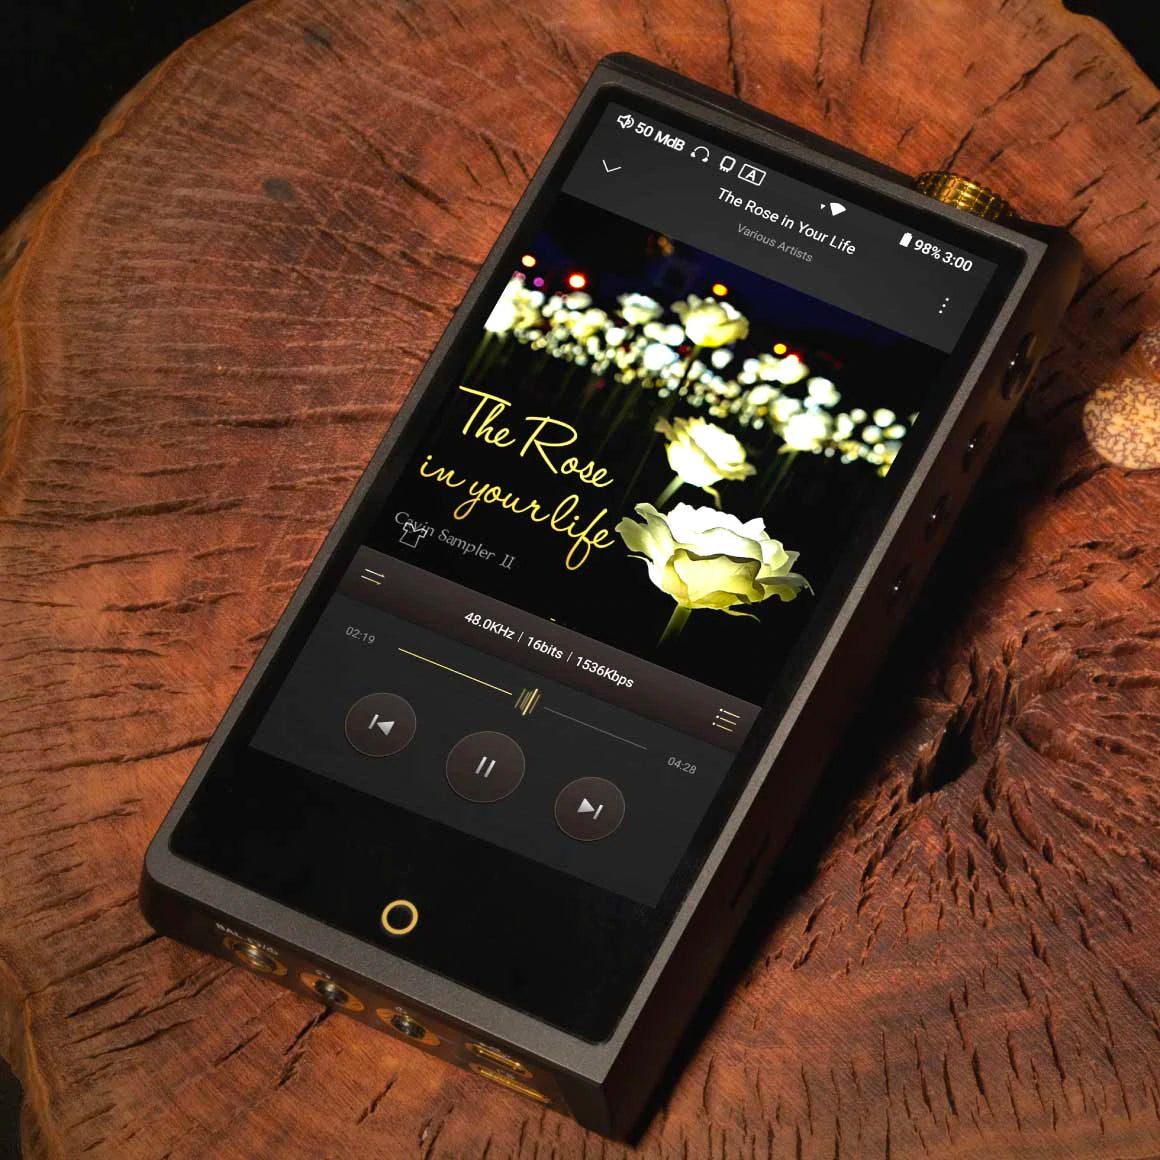 Cayin N8ii Released: Latest Flagship Digital Audio Player With Fully Balanced Tube Amplification!!